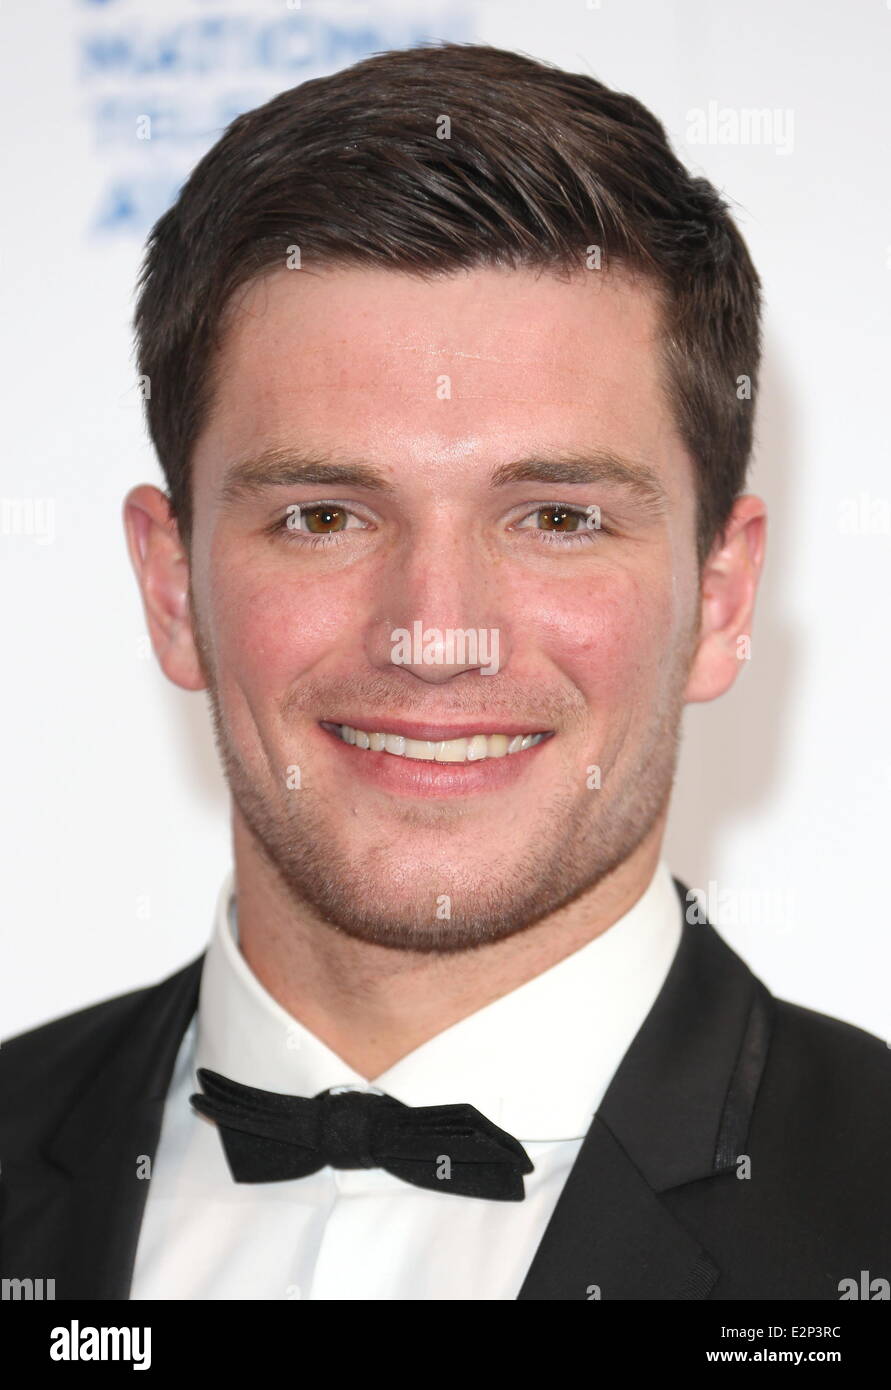 David witts hi-res stock photography and images - Alamy